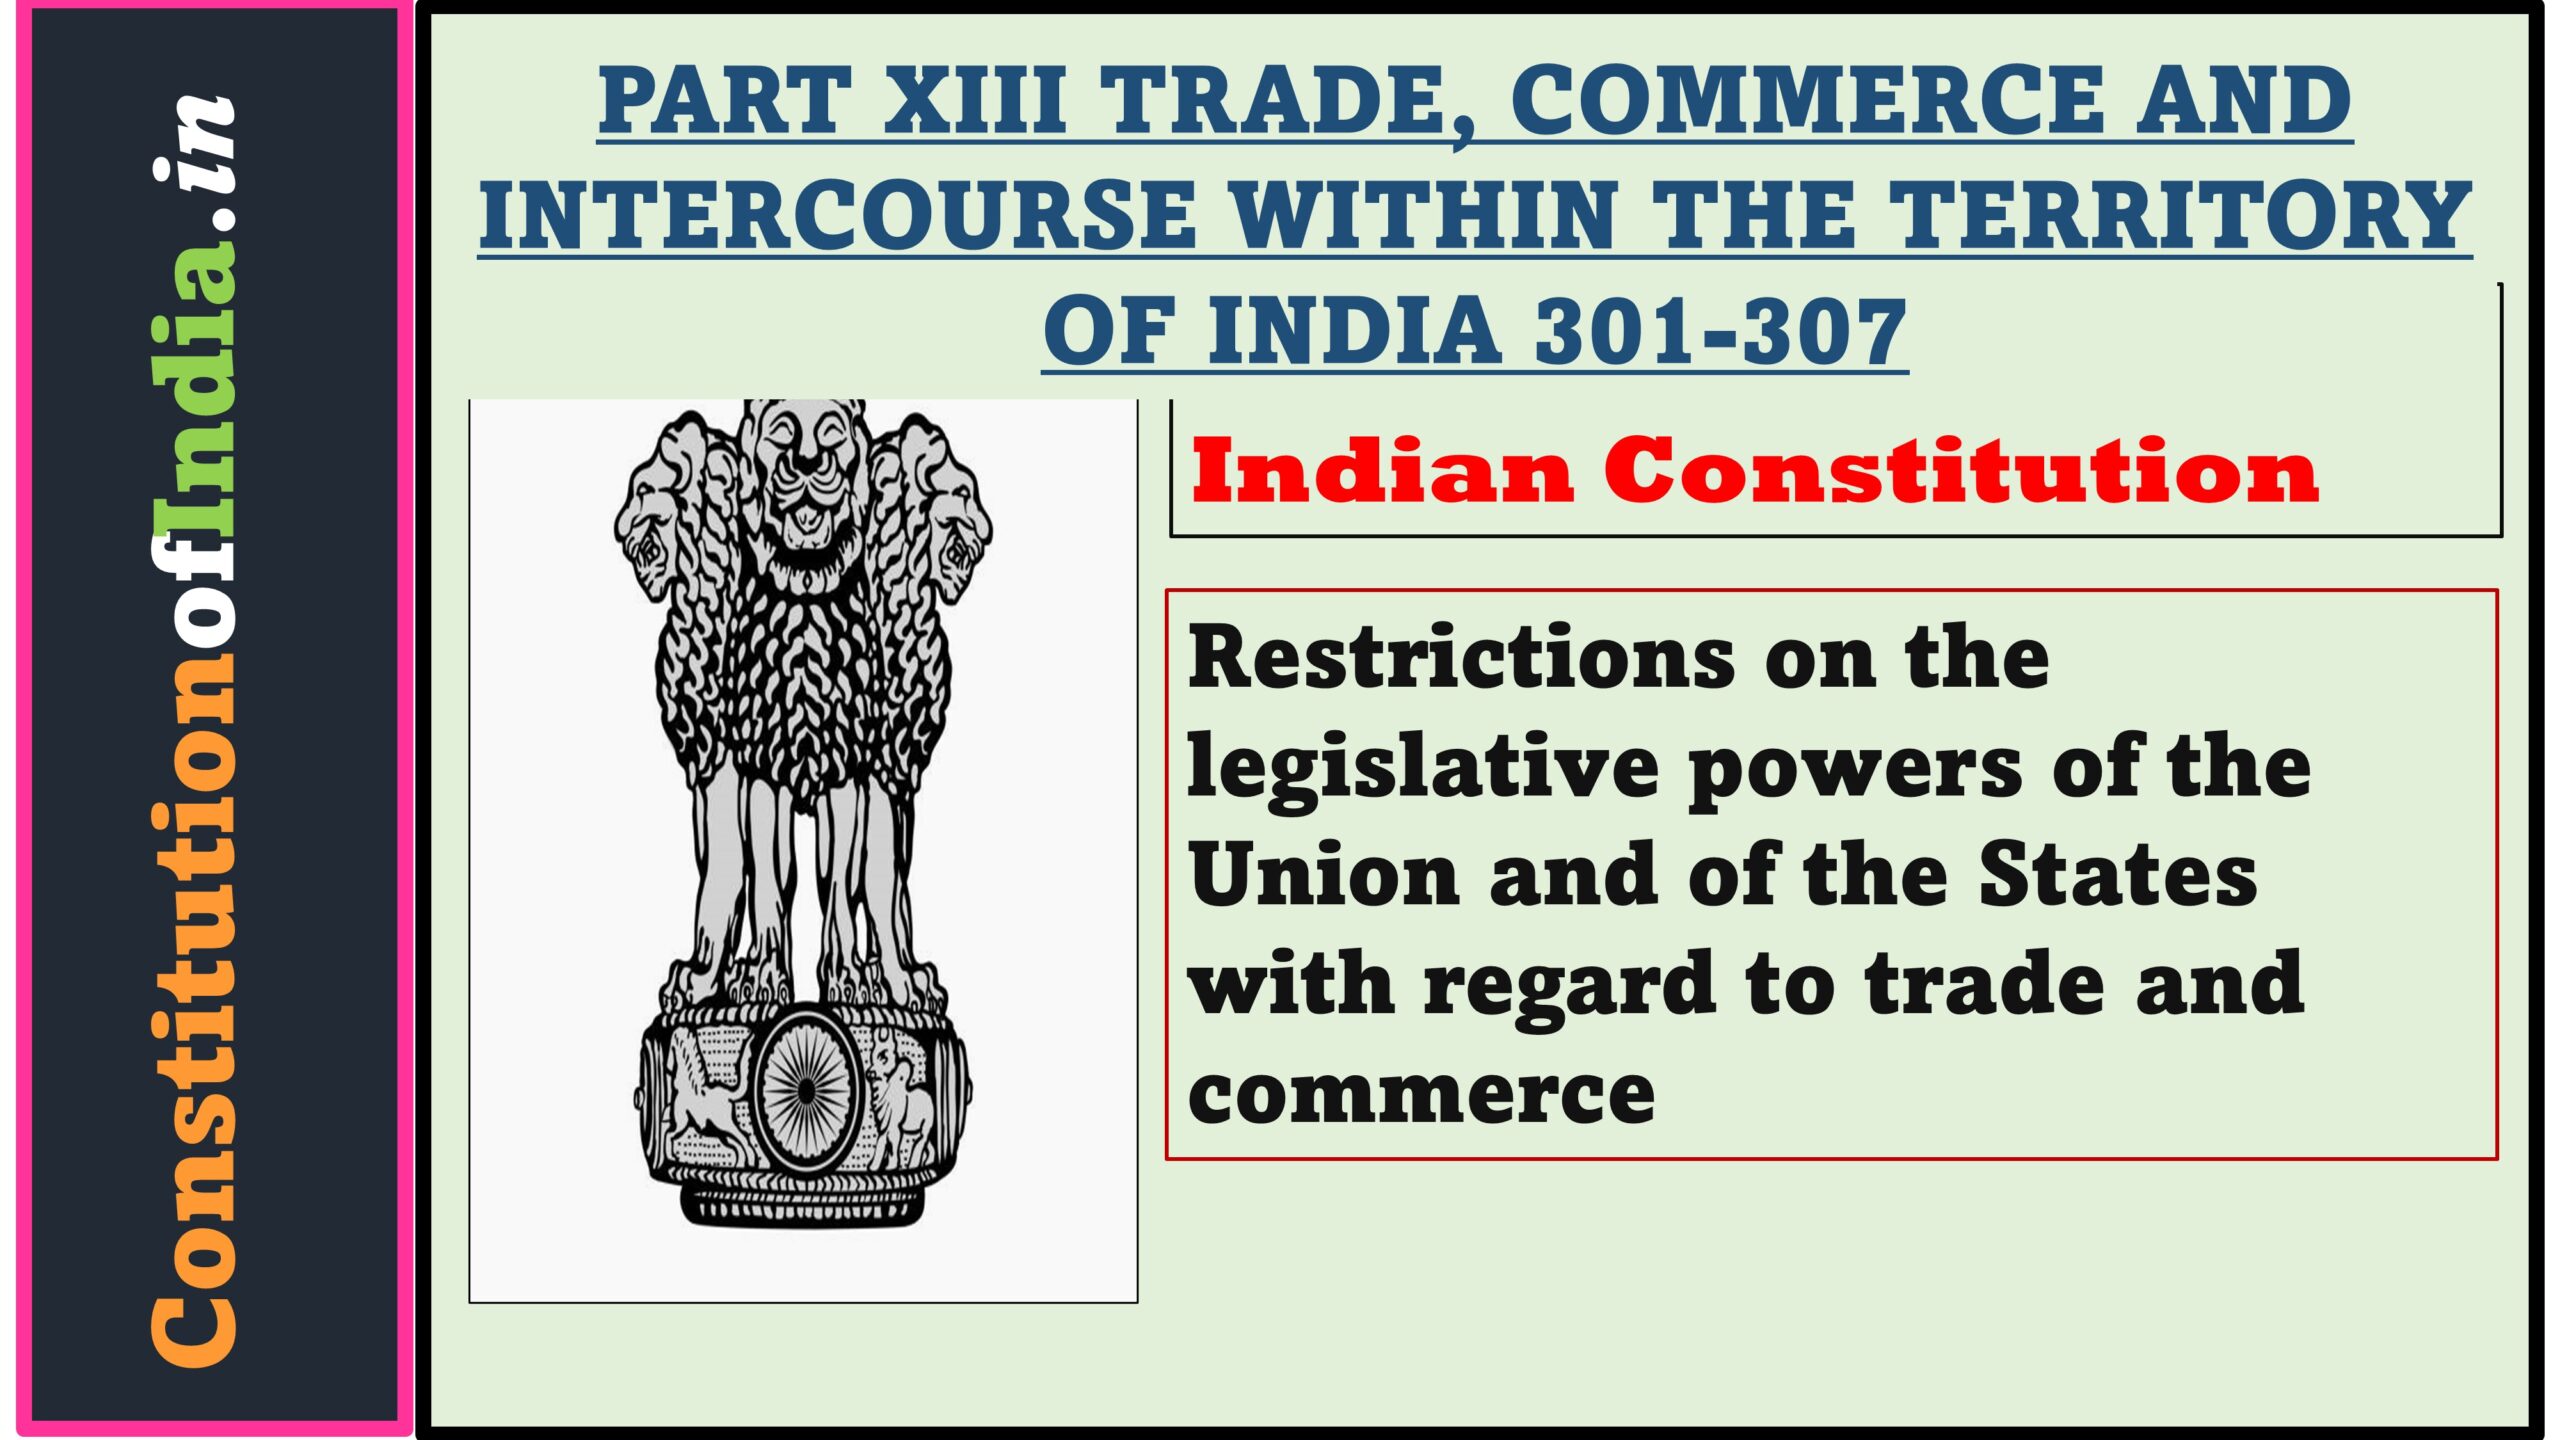 Article 303 of The Indian Constitution